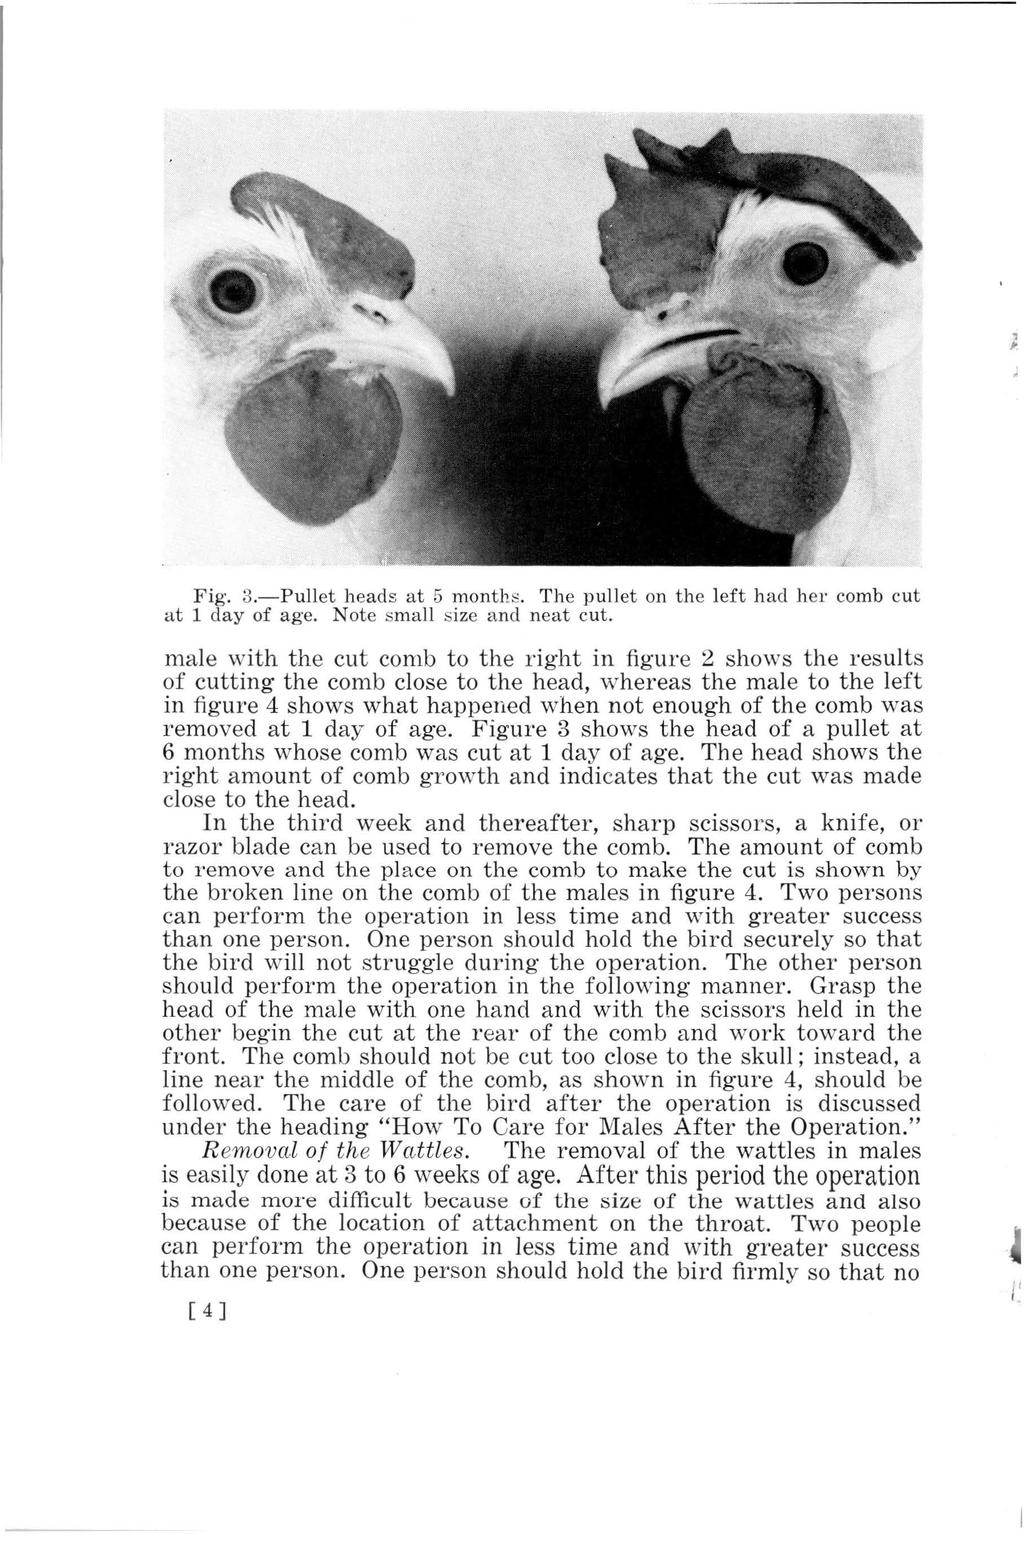 ' " Fig. 3.-Pullet heads at 5 months. The pullet on the left had her comb cut at 1 day of age. Note small size and neat cut.